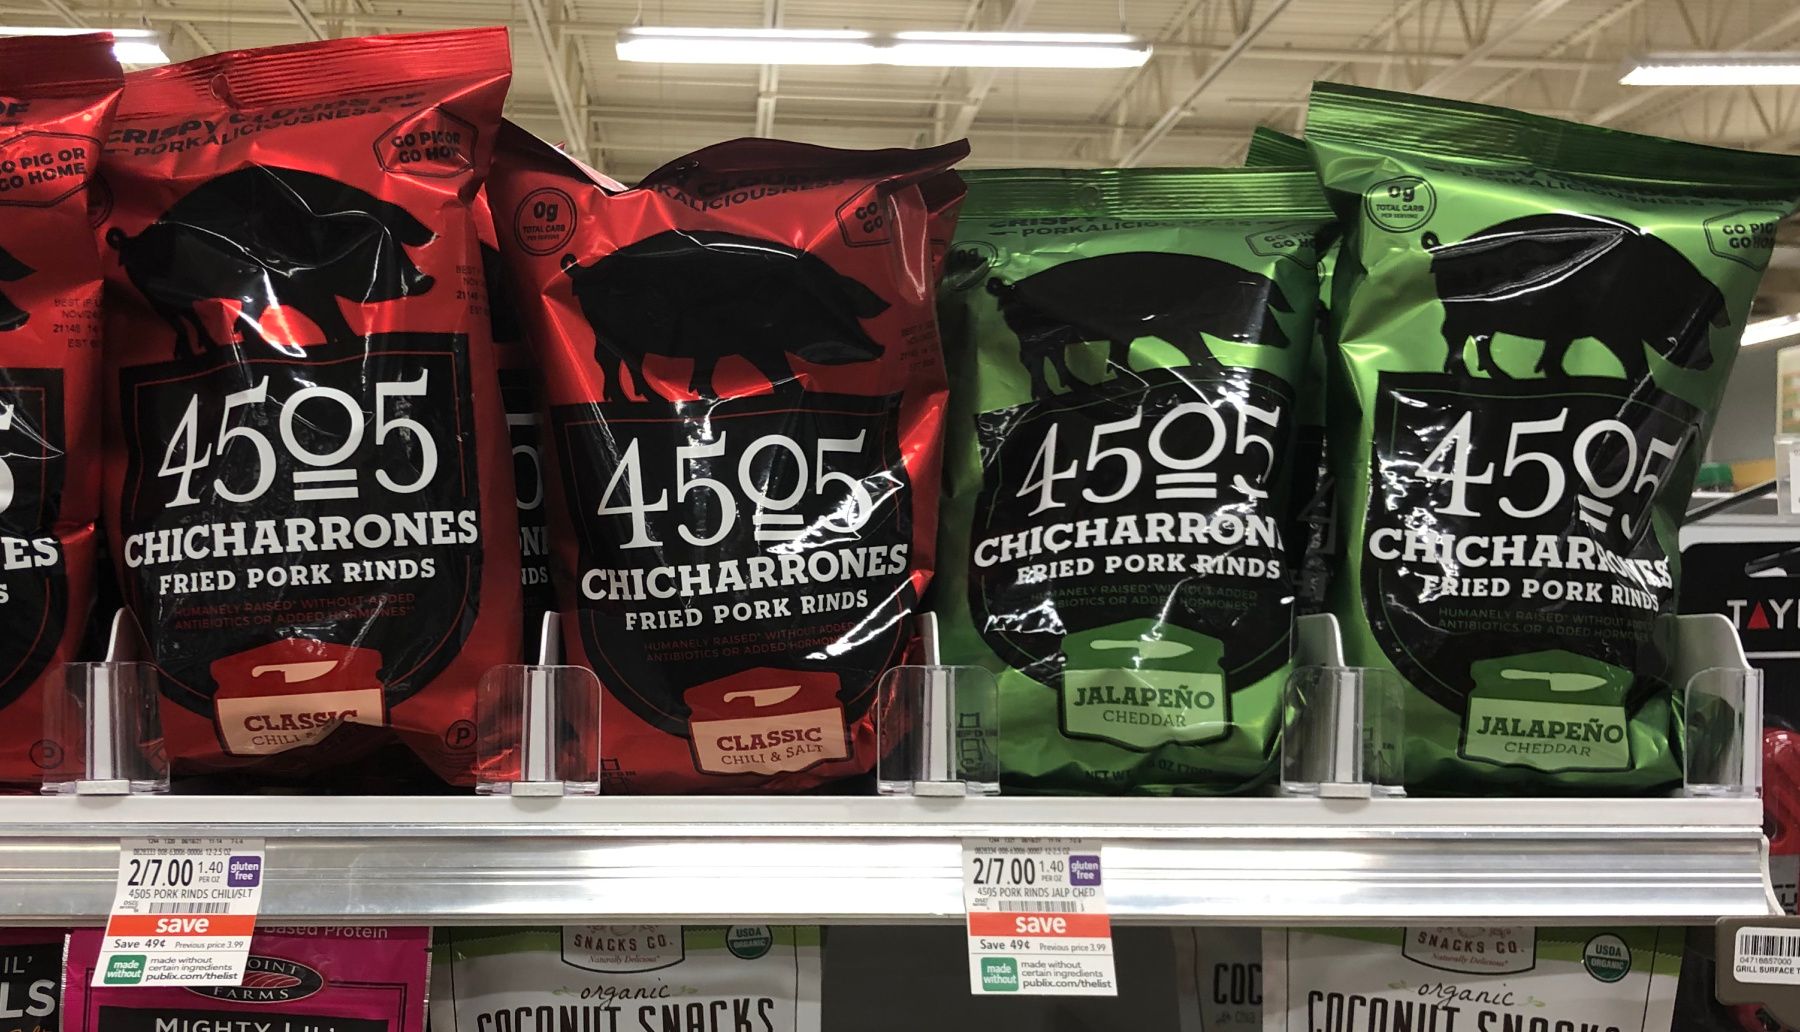 4505 Chicharrones Are Now Available At Publix - Three Winners Get A $50 Publix Gift Card & Lots Of FREE 4505 Chicharrones! on I Heart Publix 1